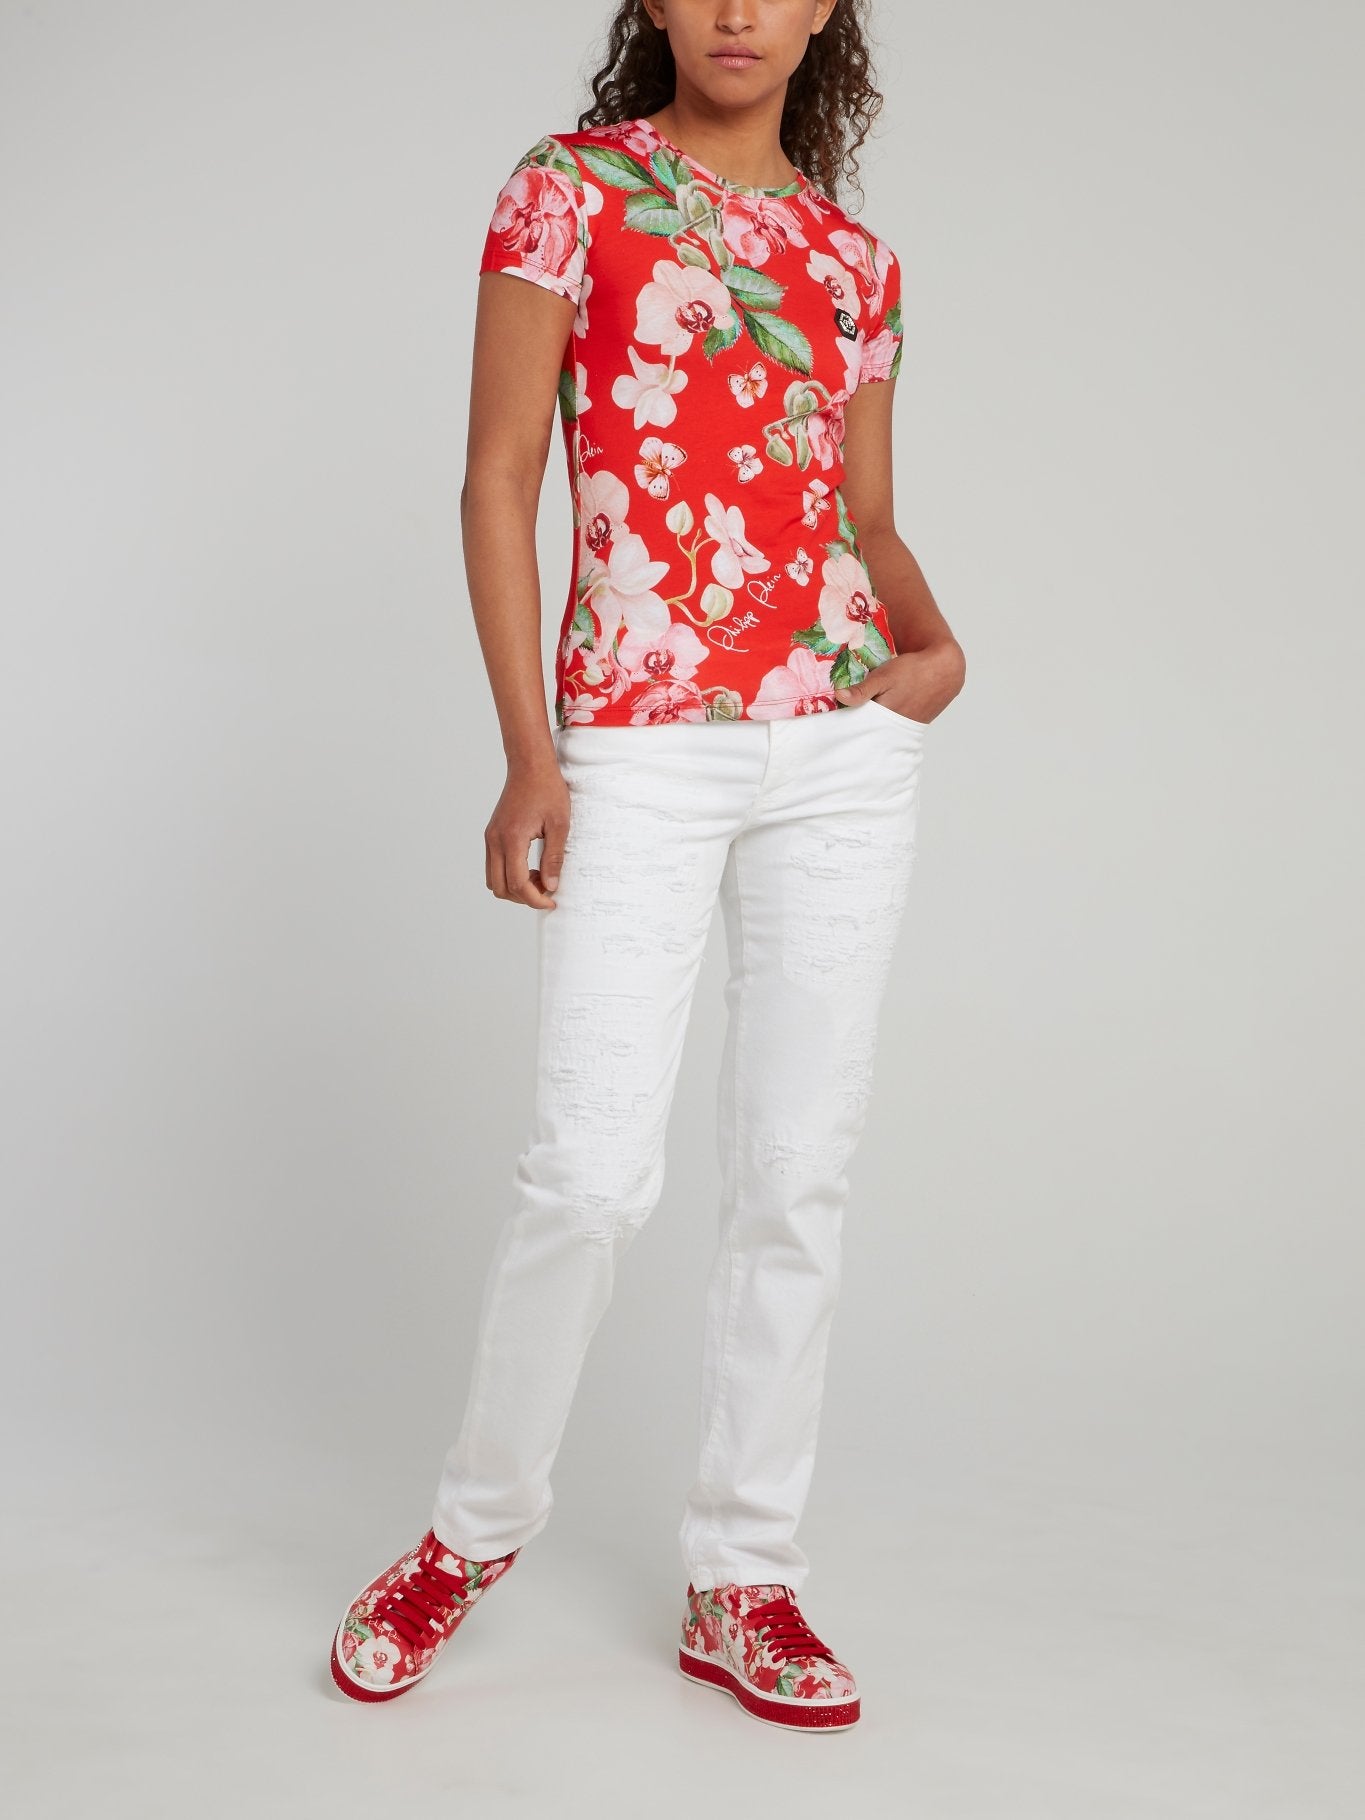 Back Studded Floral Print Fitted Shirt